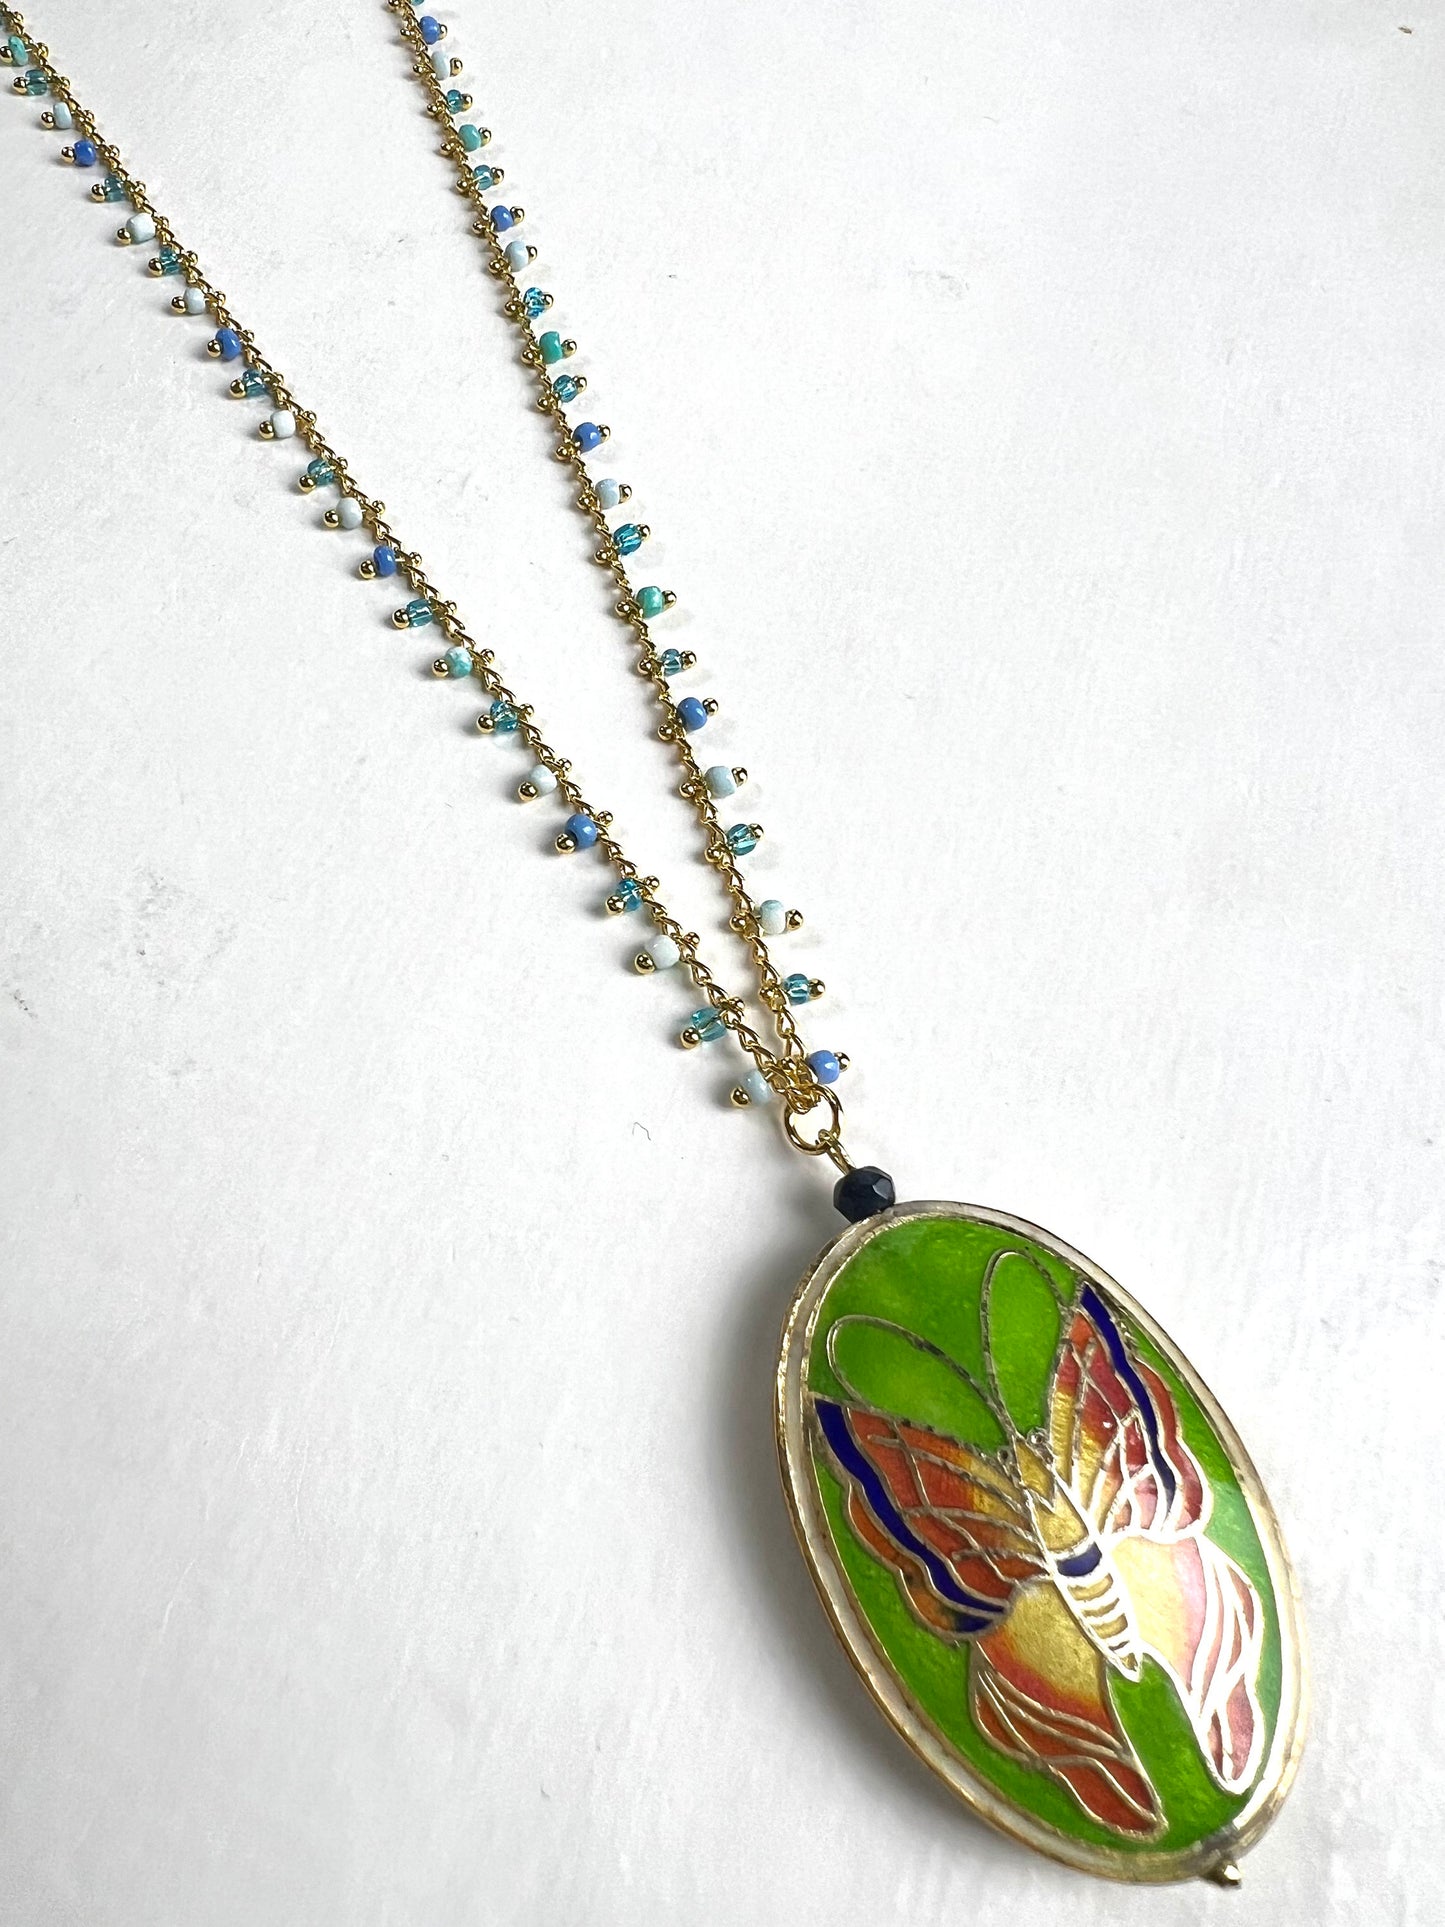 Traditional Cloisonné Pendant Vintage Butterfly Focal with matching Gold Beaded Chain 22” Necklace .Orange green pendant and blue green